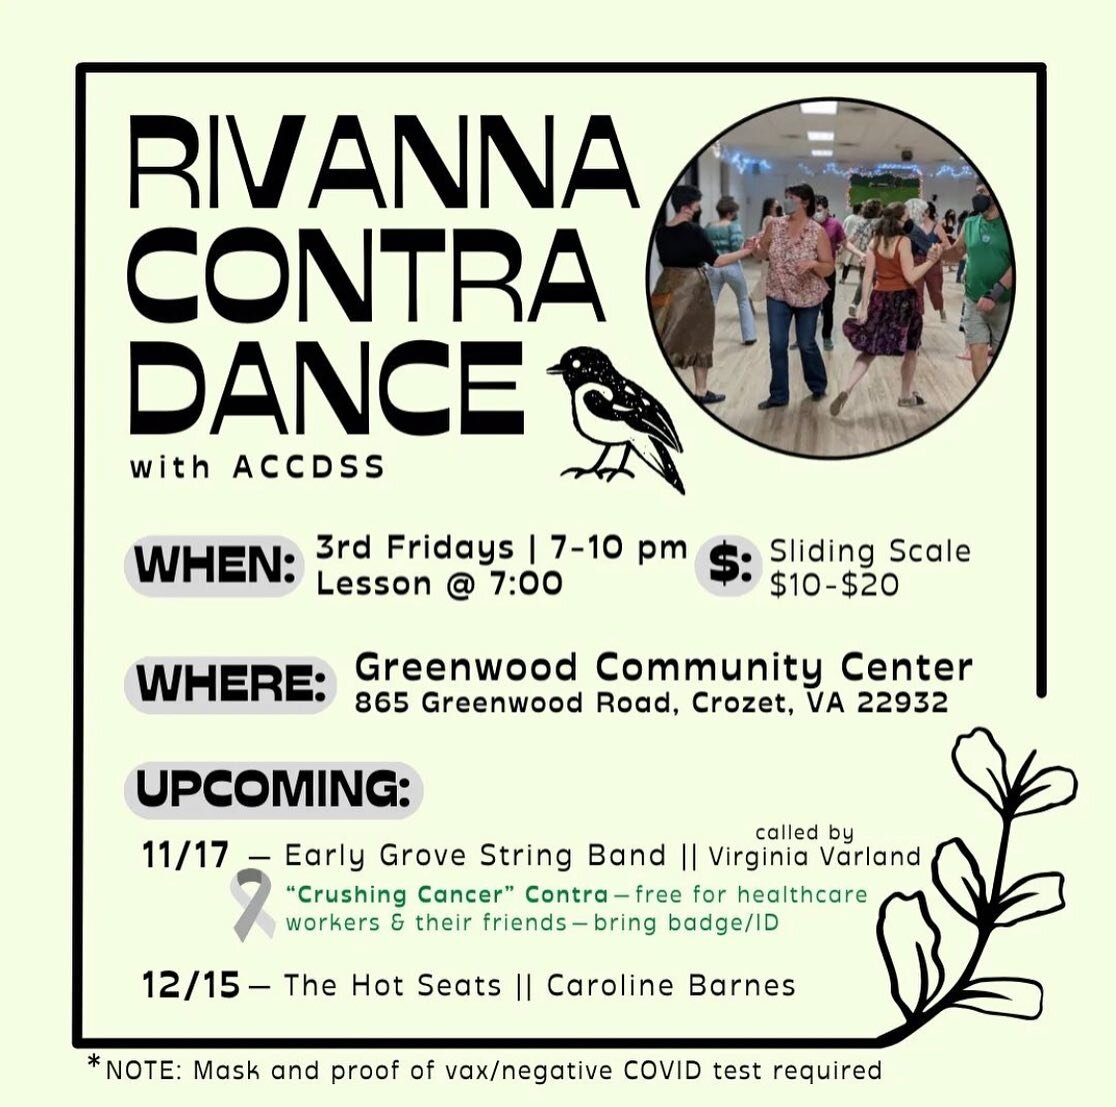 Rudy, Jake, and Josh will be playing for the Rivanna Contra Dance this Friday at the Greenwood Community Center! Come on out, balance, swing, repeat! 

#tadams #contradance #greenwoodcommunitycenter #tatersandtags